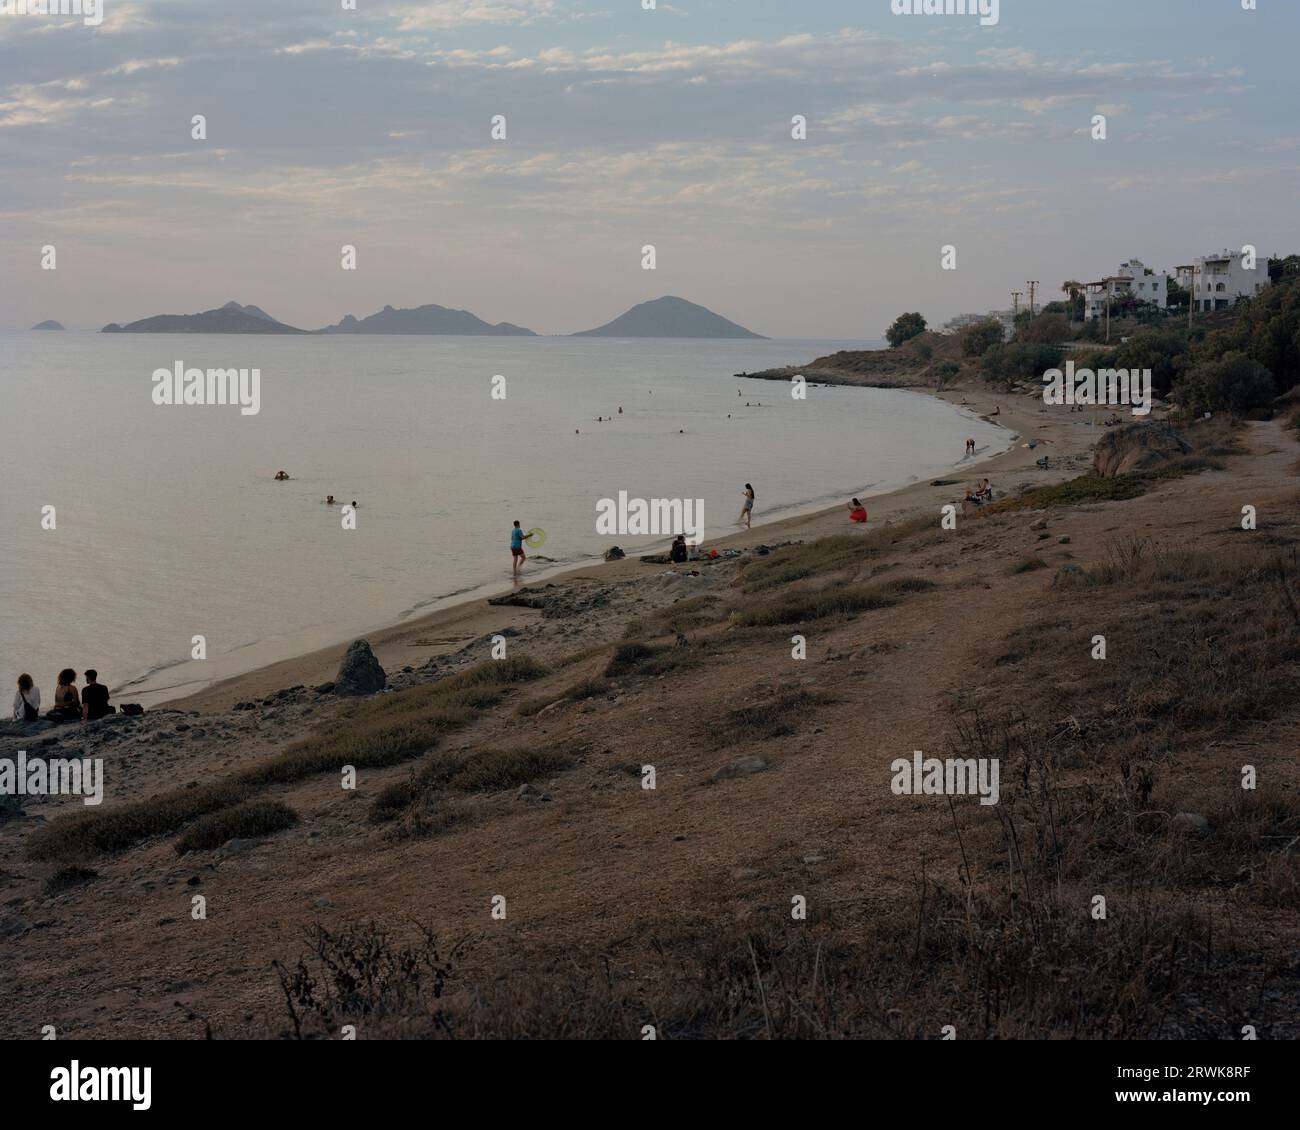 Akyarlar beach in Bodrum, Turkey, where the lifeless body of three-year-old Alan Kurdi, a Syrian refugee, was discovered on September 2, 2015. This st Stock Photo